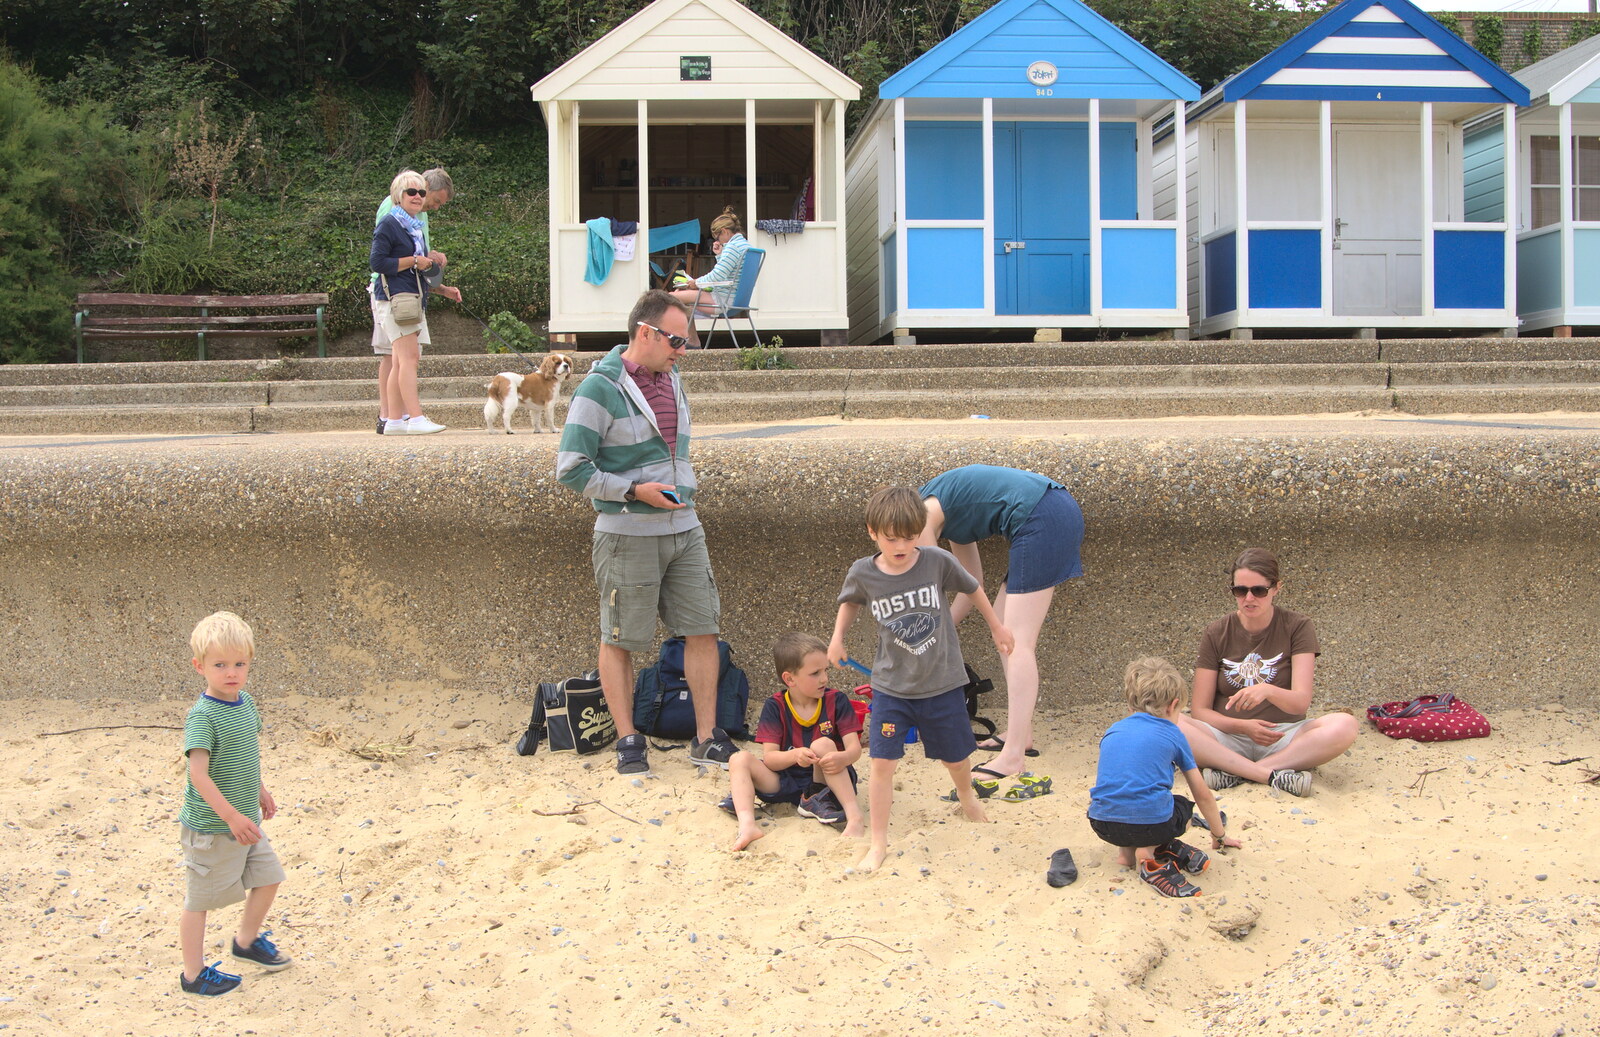 The boys get ready to play in the sea from The Danger of Trees: A Camping (Mis)adventure - Southwold, Suffolk - 3rd August 2015